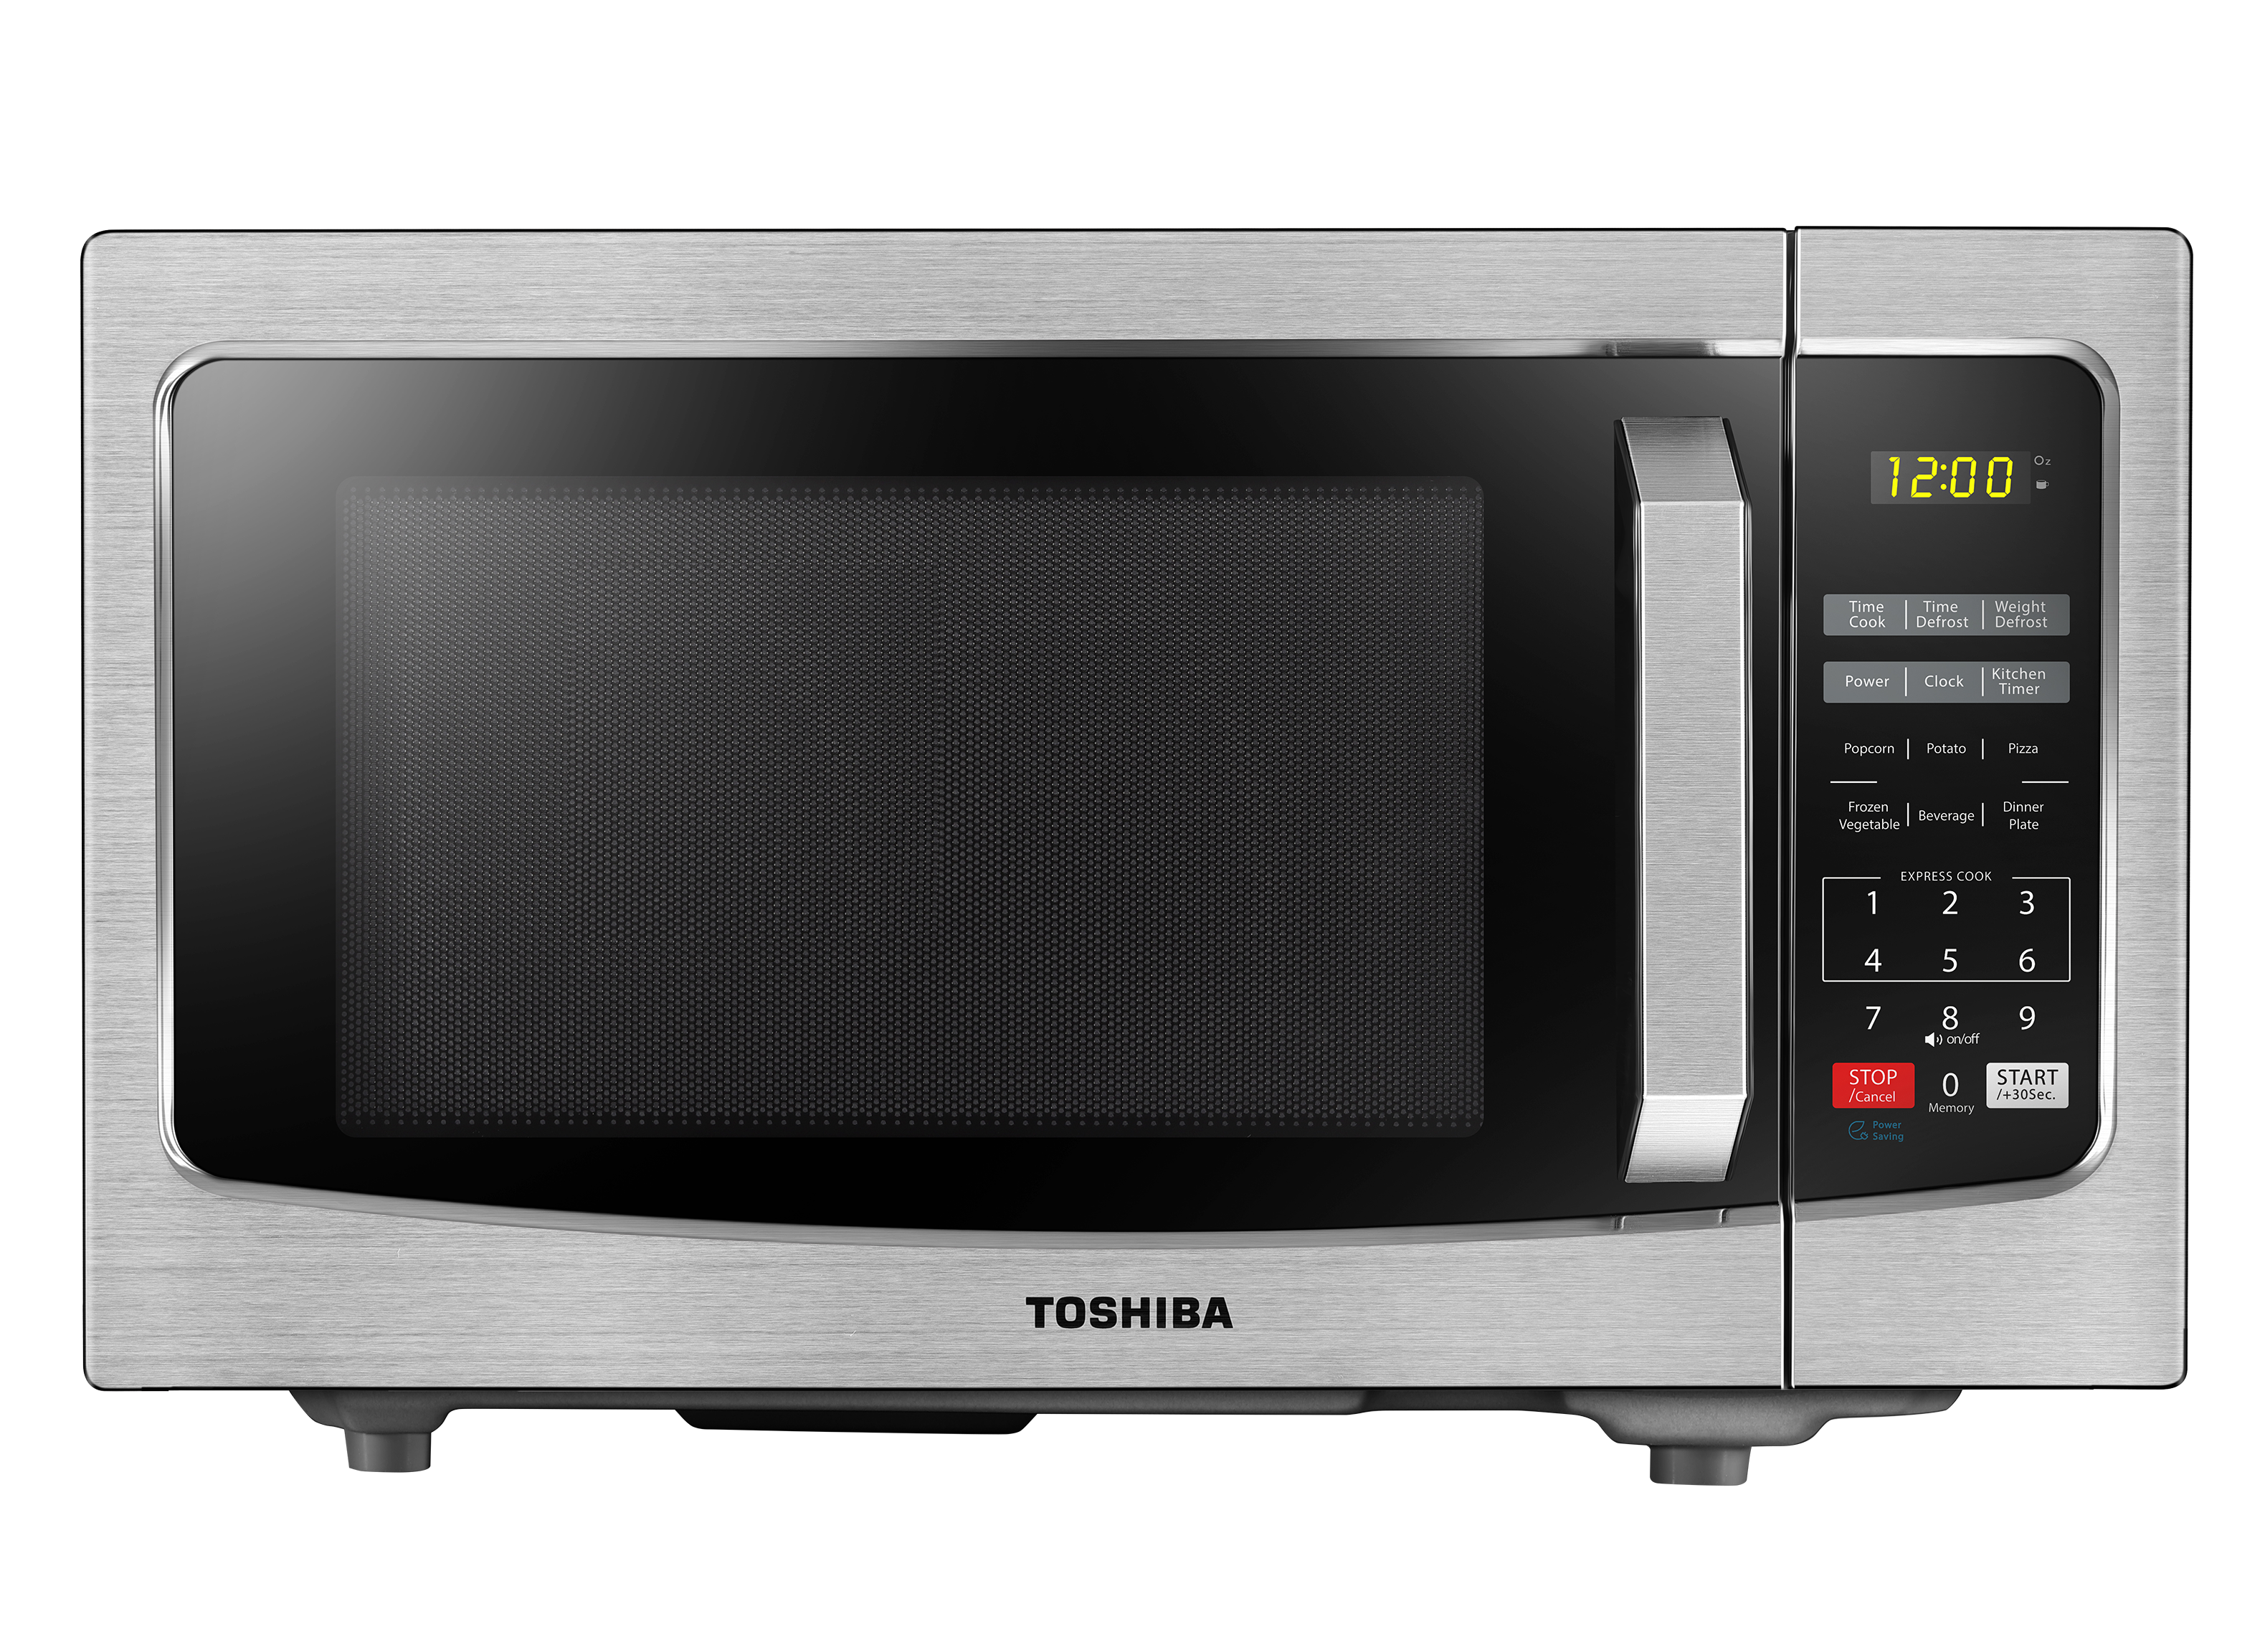 https://crdms.images.consumerreports.org/prod/products/cr/models/402662-midsized-countertop-microwaves-toshiba-ml2-em31pass-10016890.png